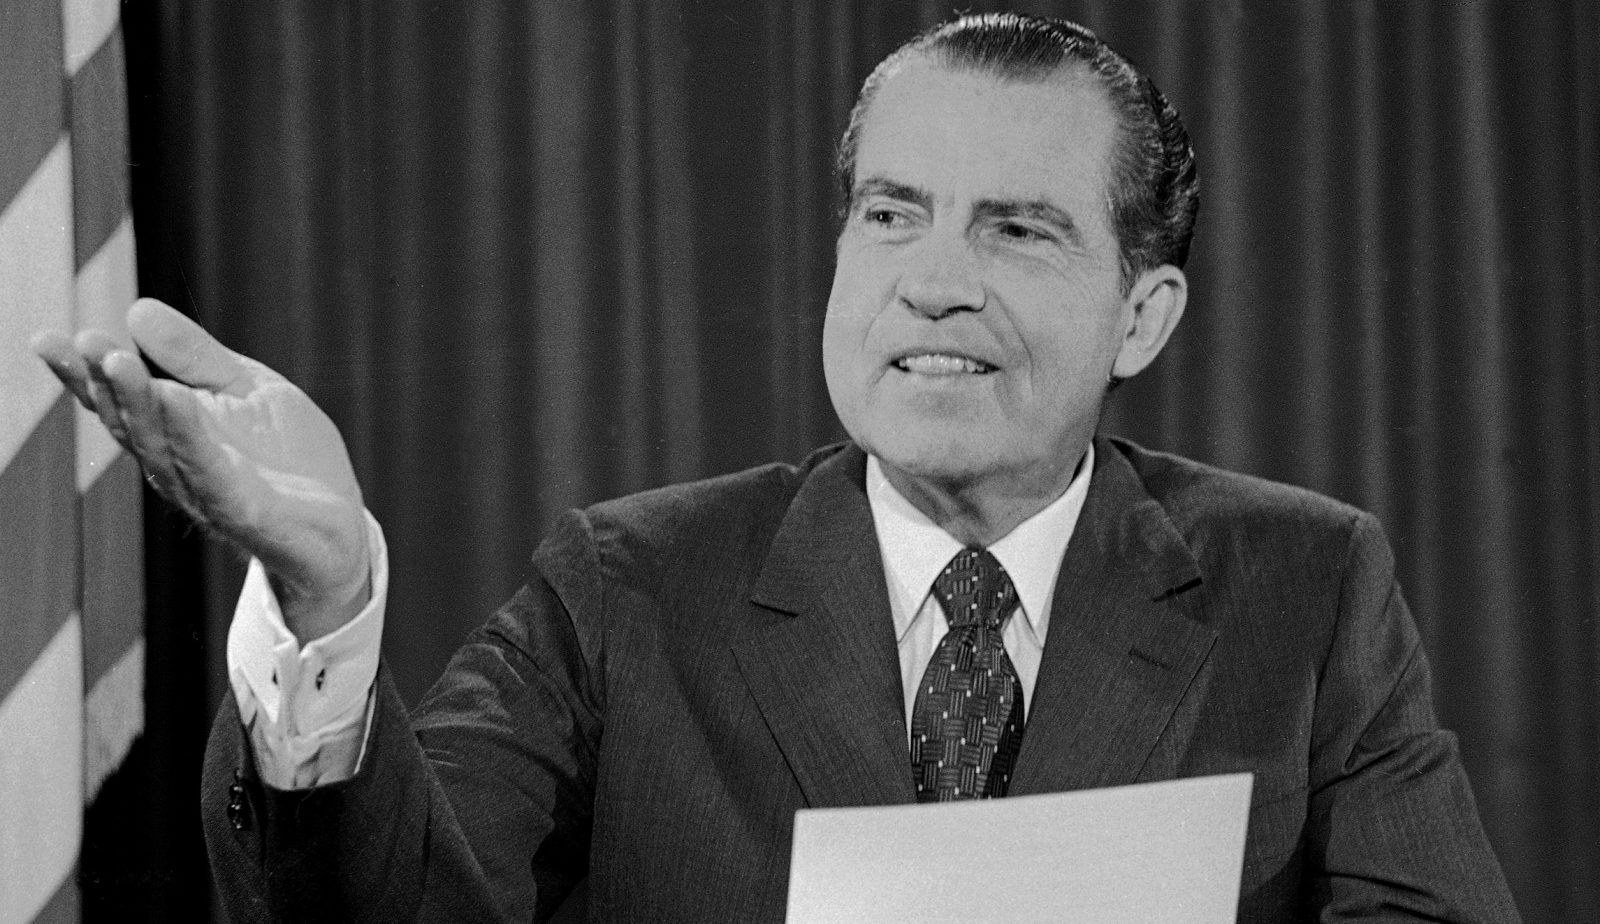 Can You Get an ‘A’ In This Middle School U.S. History Test? Richard M. Nixon